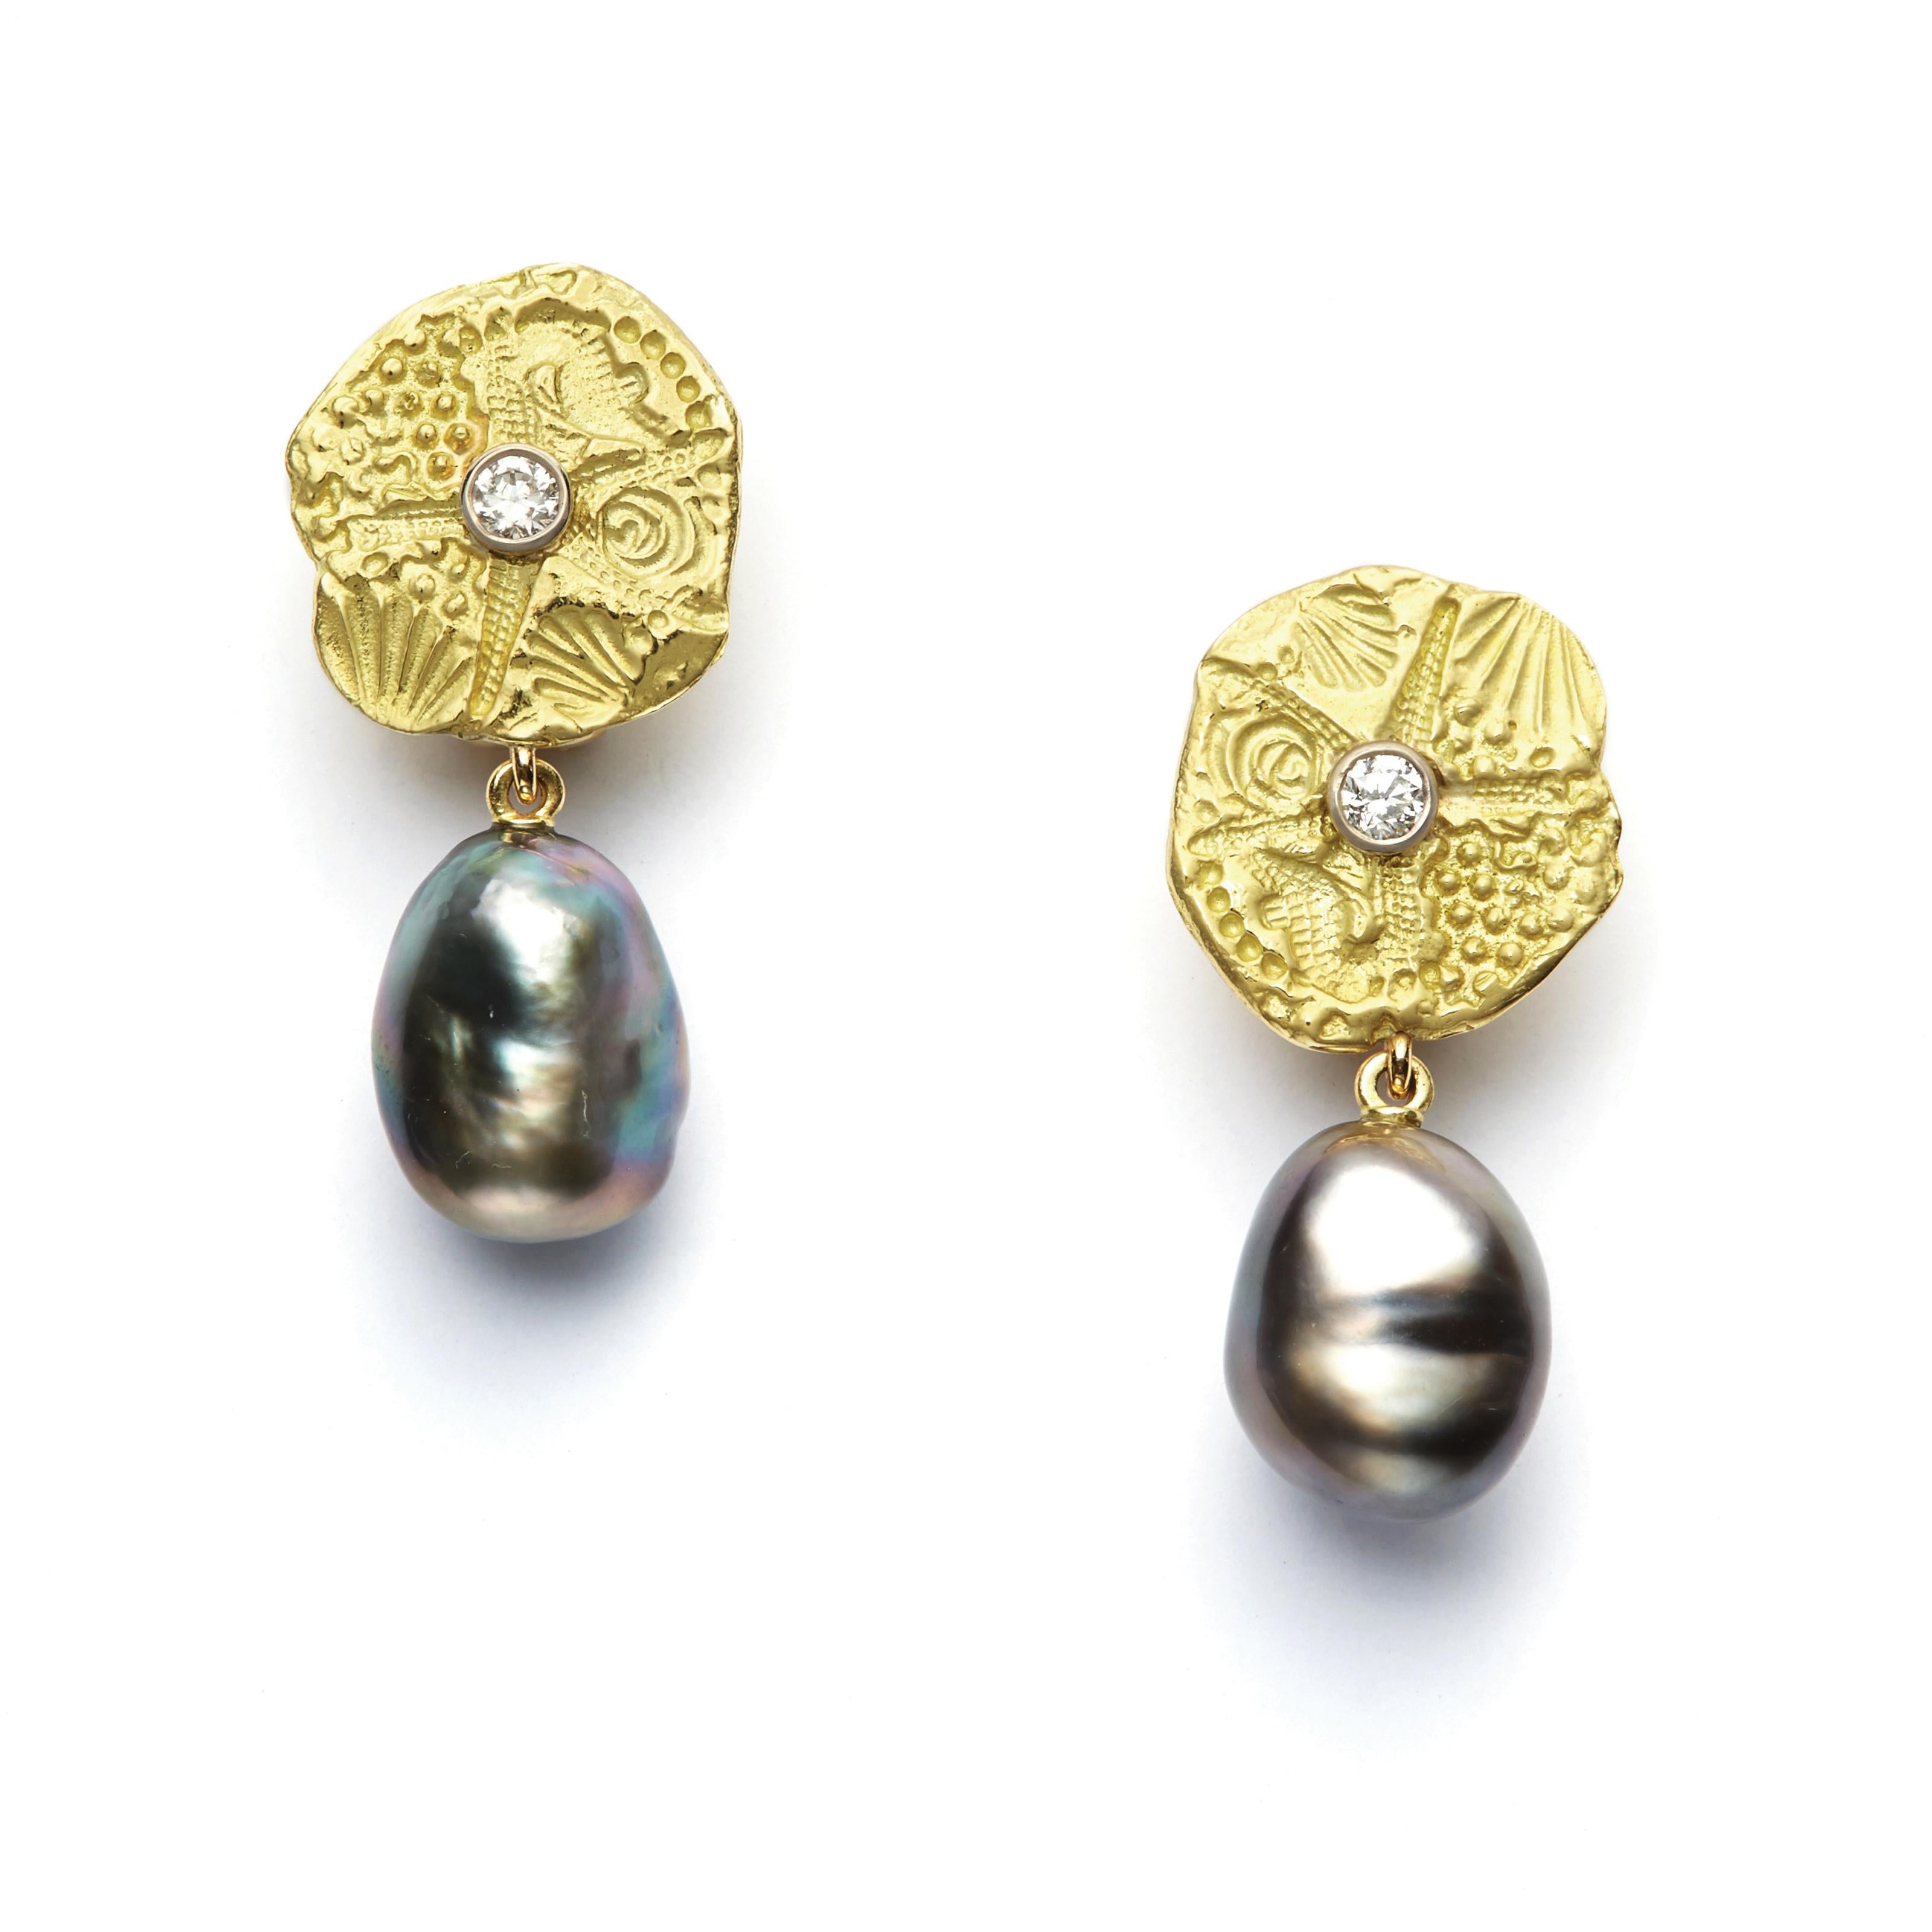 Sea-inspired glamour! These 18 Karat Gold Starfish Disc with Diamond and Tahitian Baroque Pearl Earrings are perfect for any formal occasion.
Available as clip ons or regular

Diamonds G VS 1 .20 Carat
